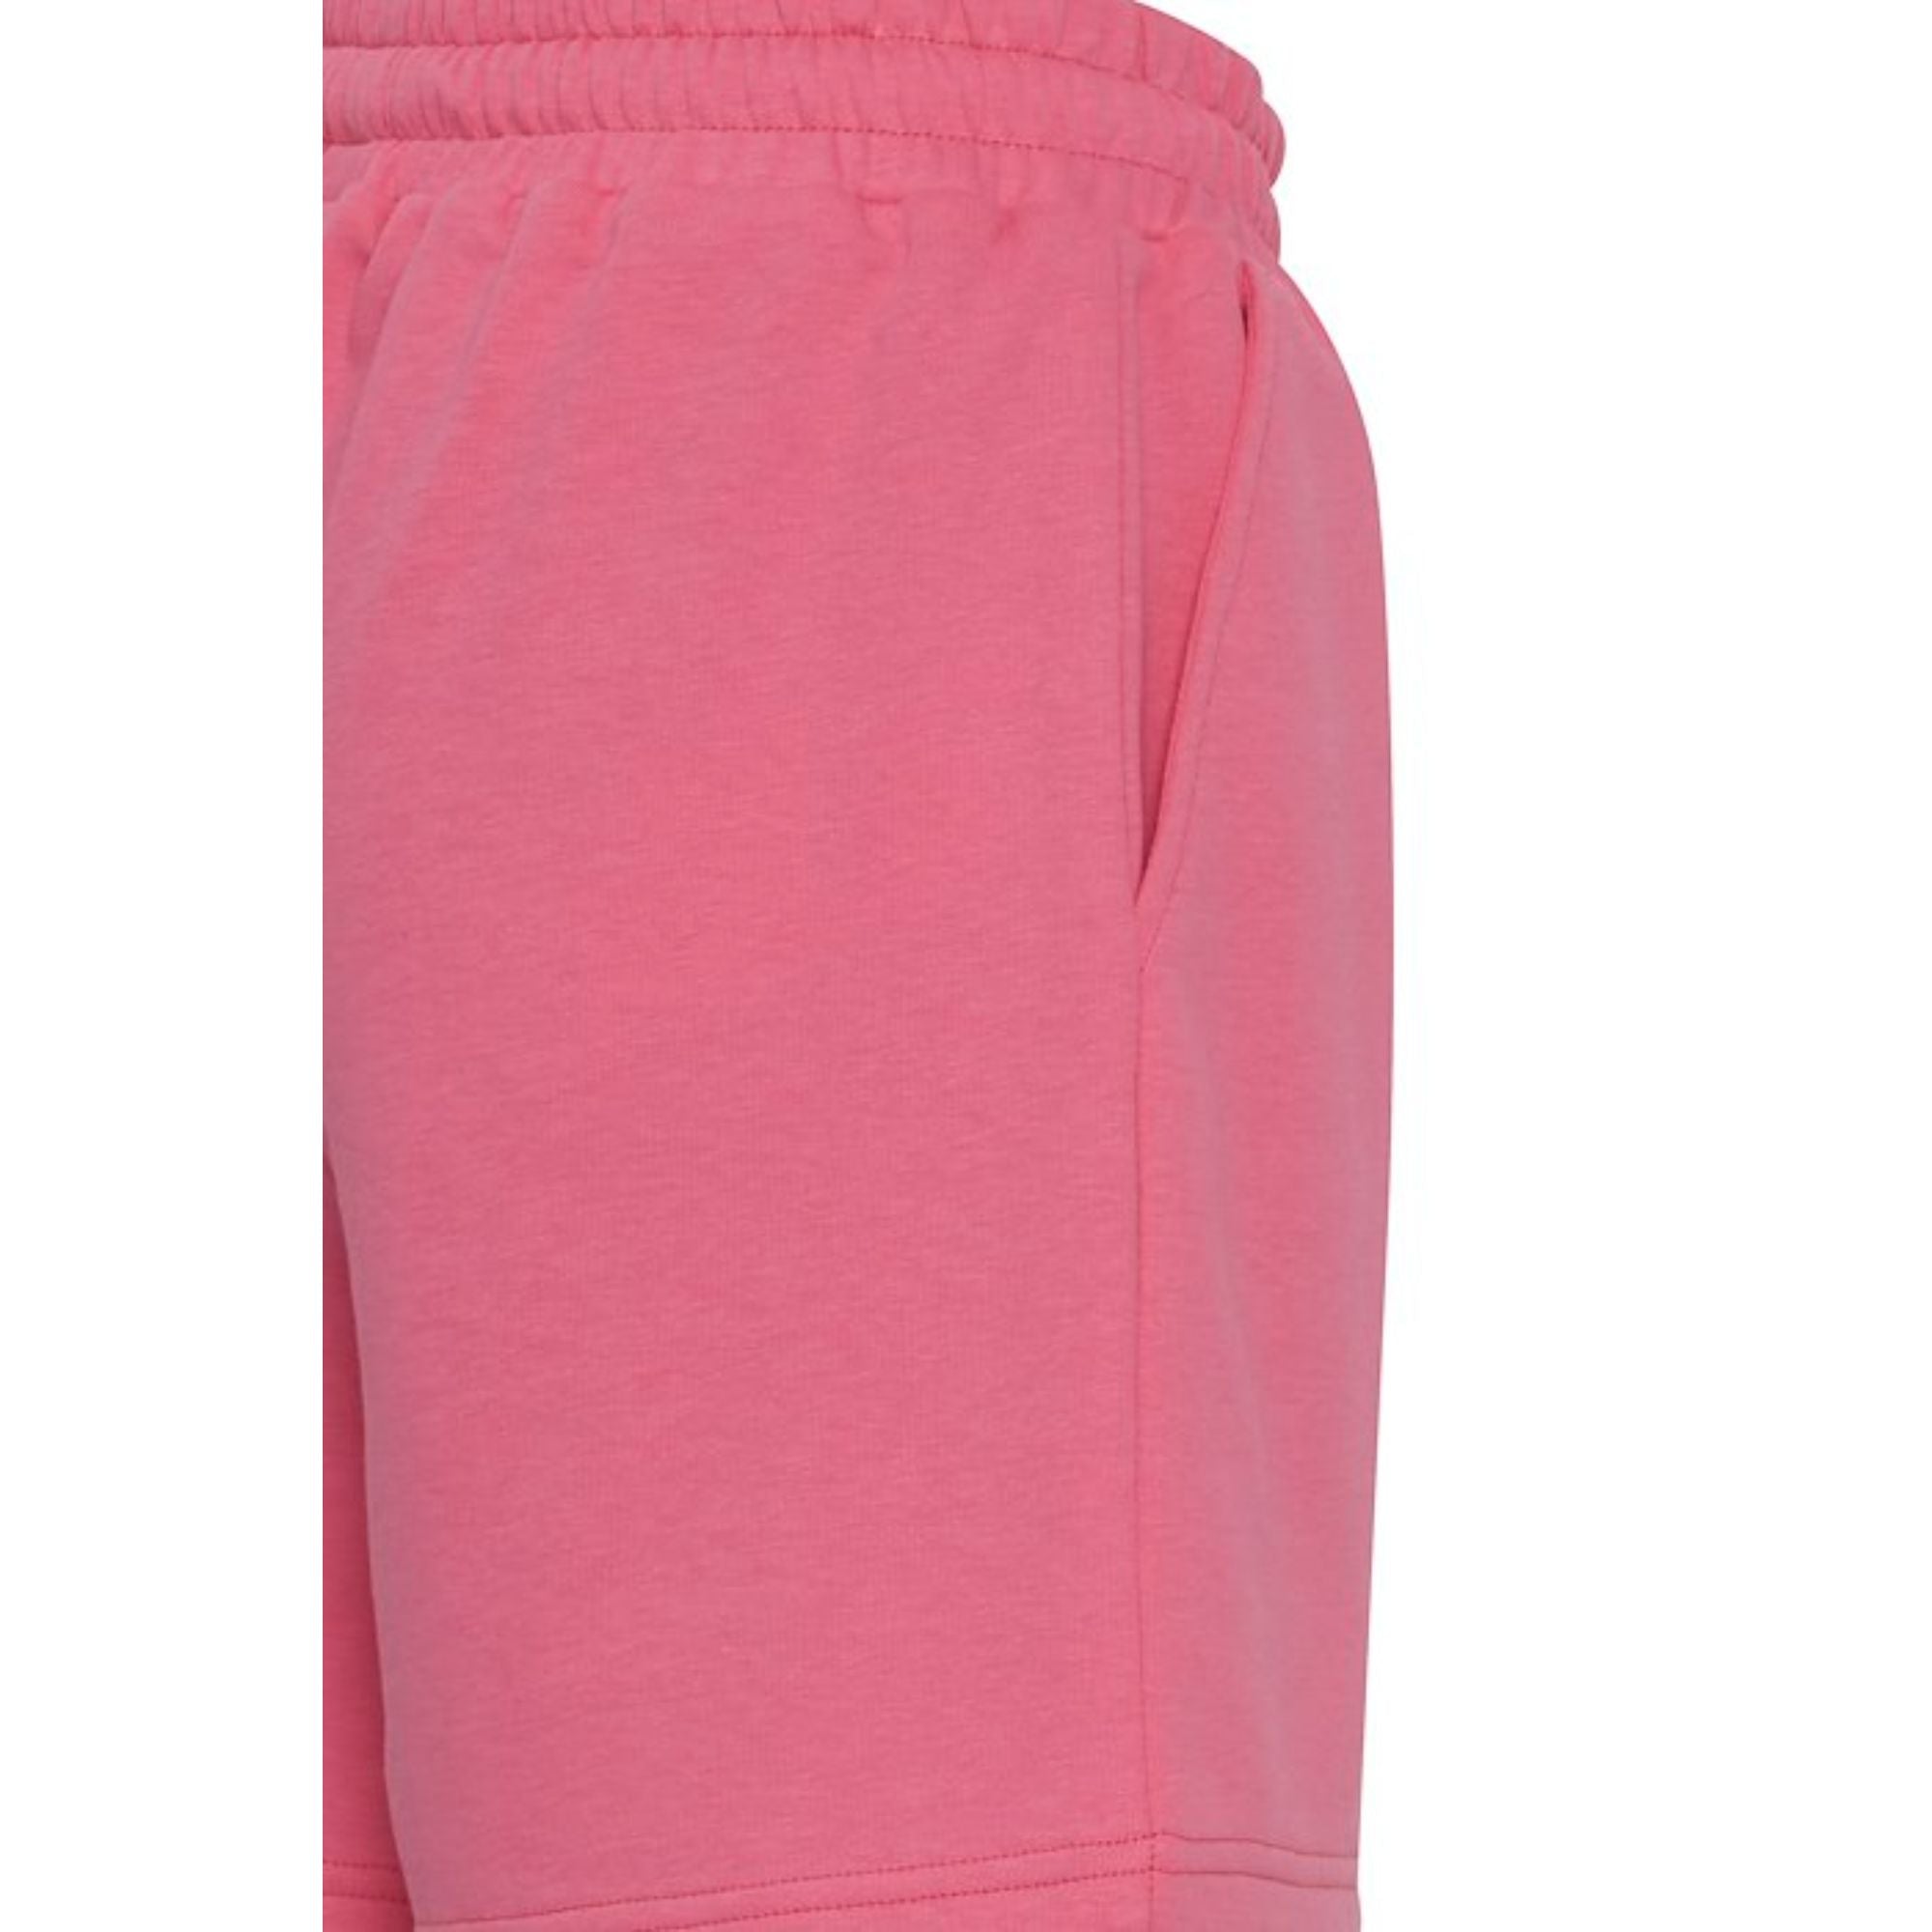 The Jogg Concept Safine Shorts Pink